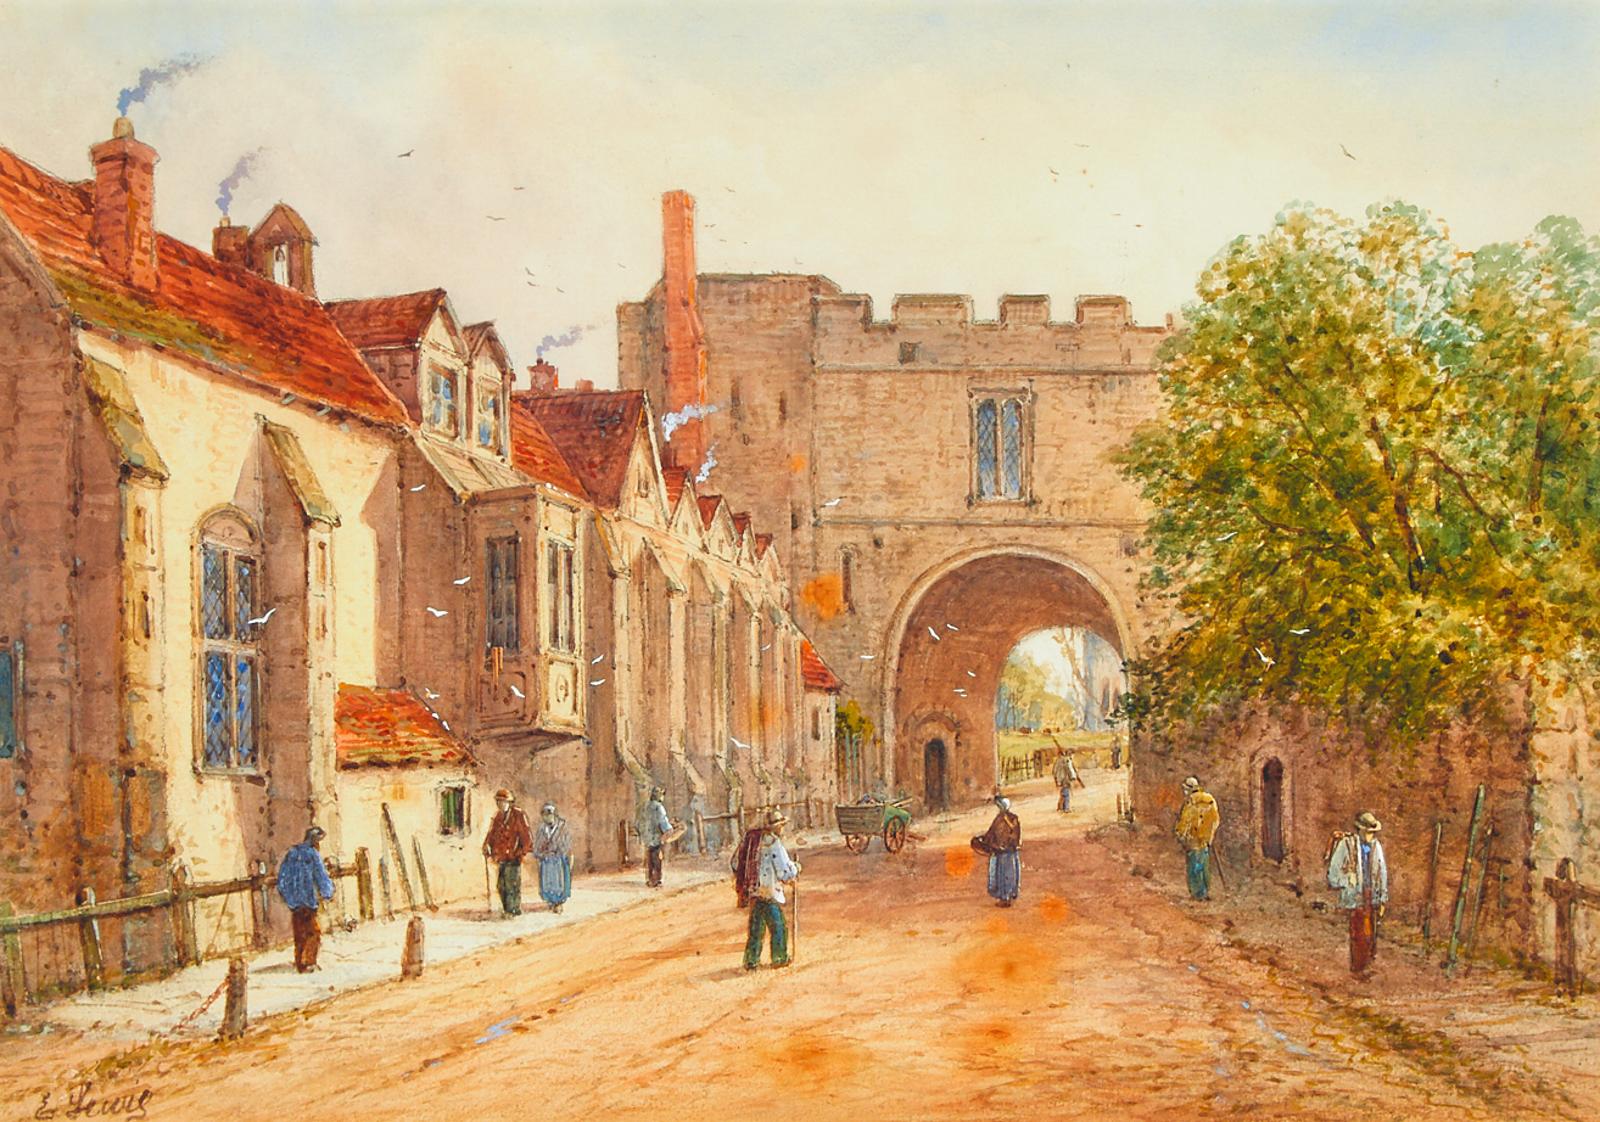 E. Lewis - Medieval Archway To Village Lane And Townsfolk